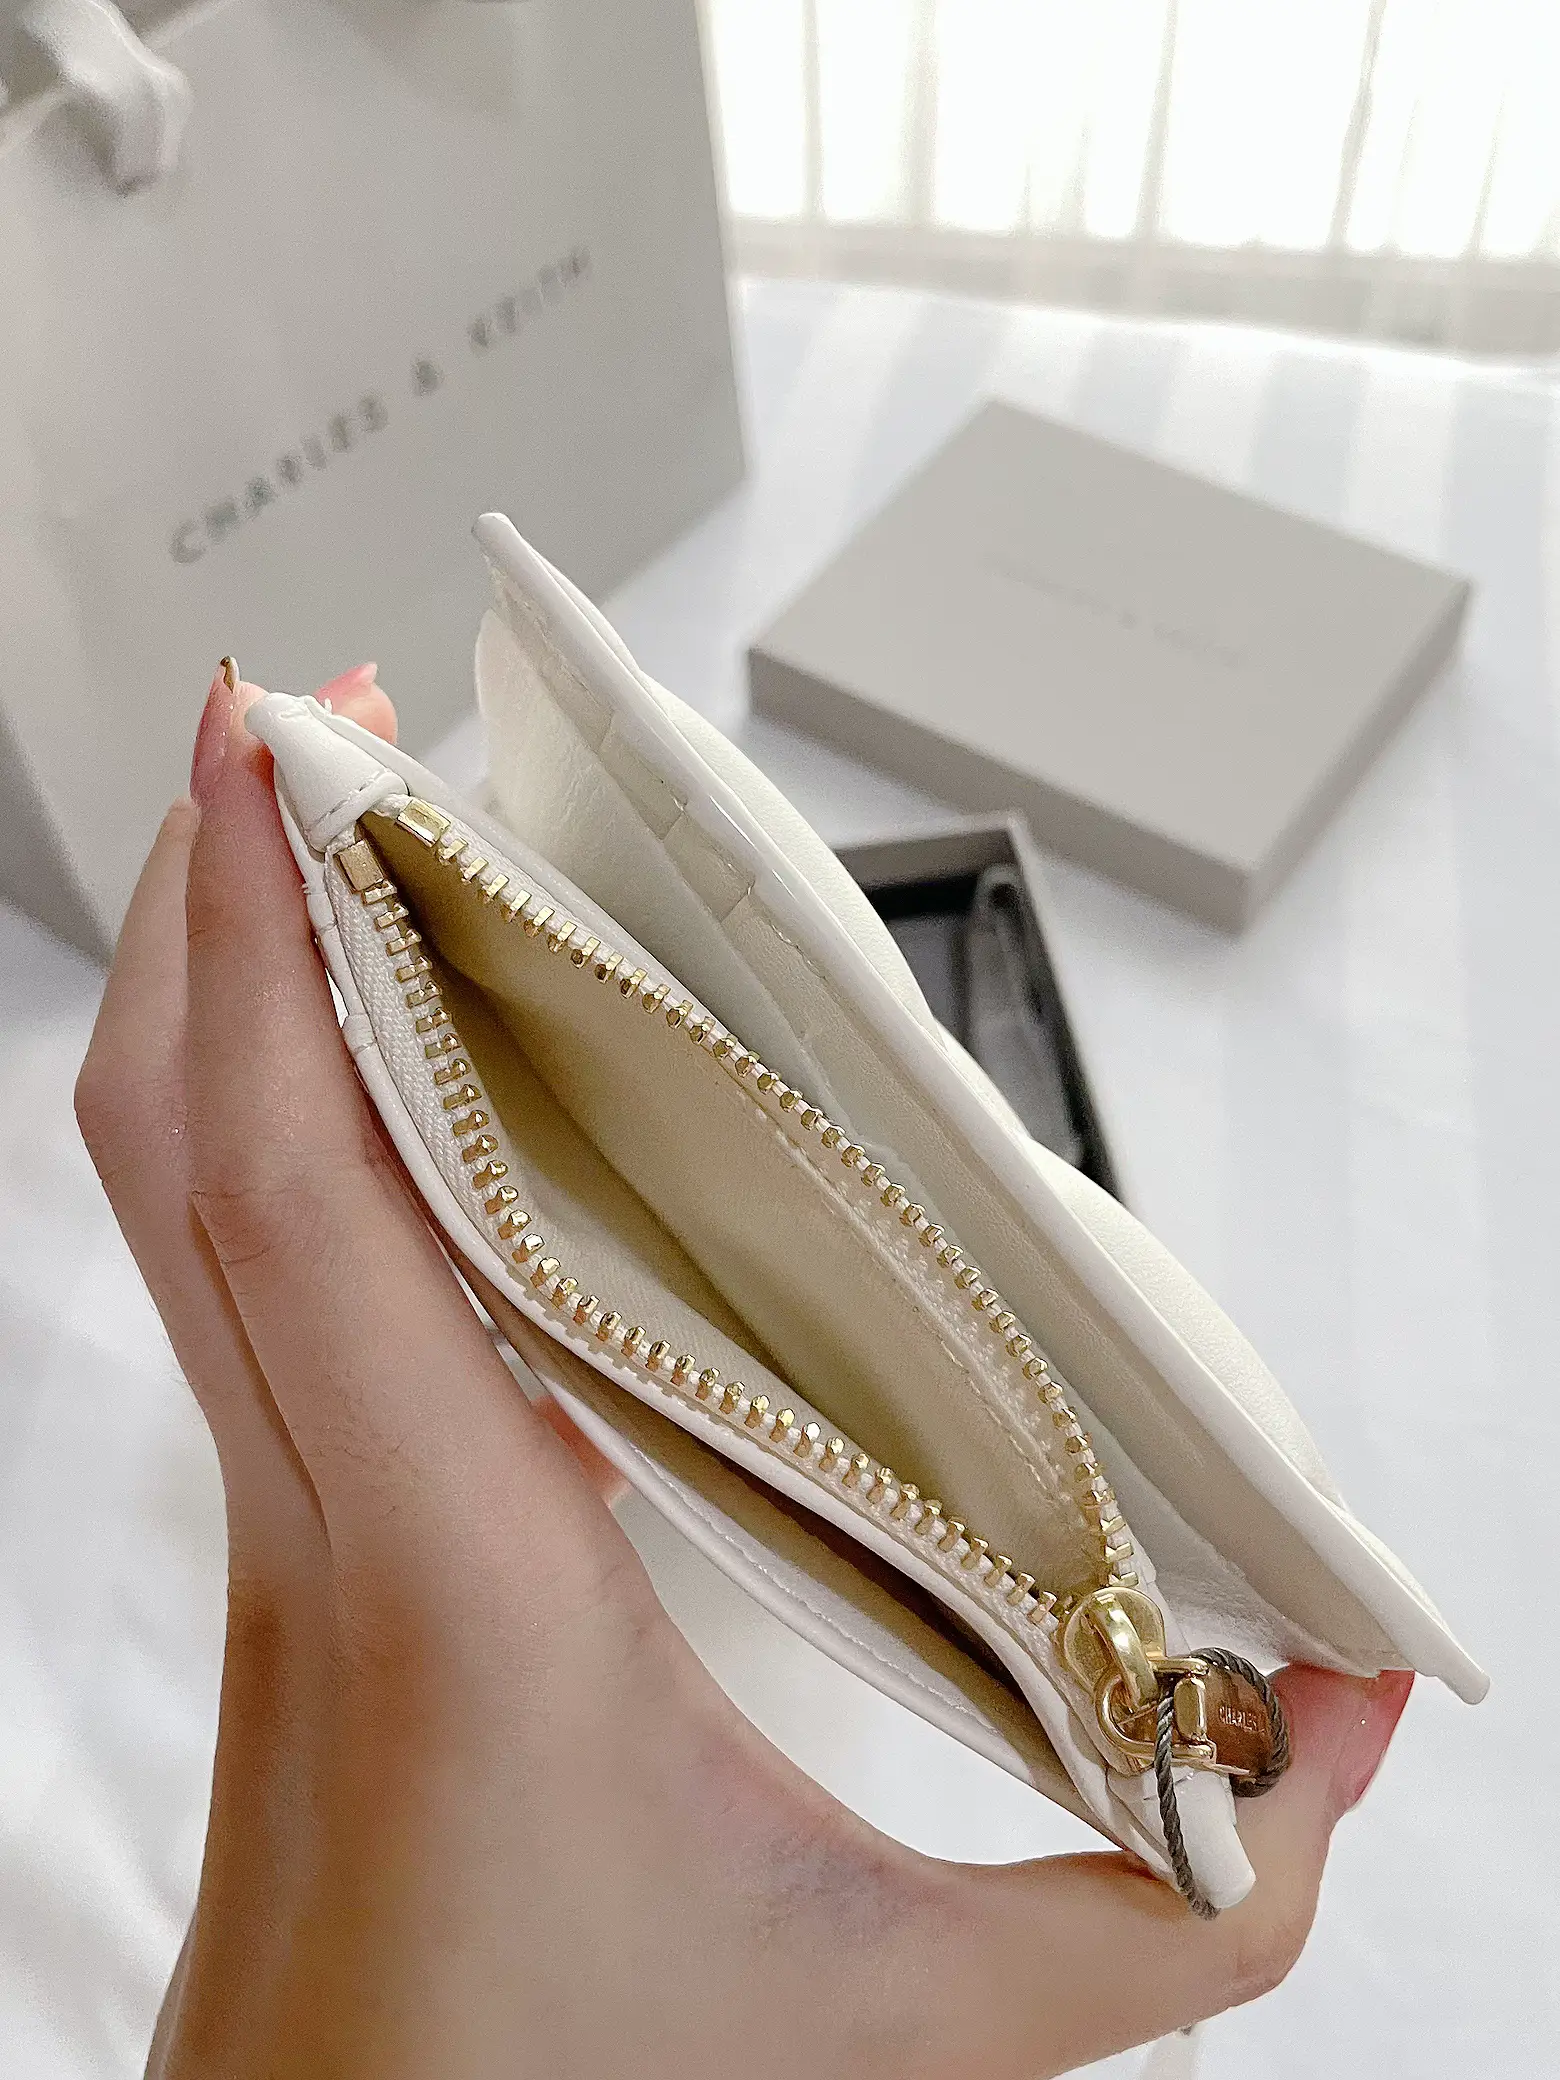 Charles & Keith Crossbody Bags Review + Unboxing 